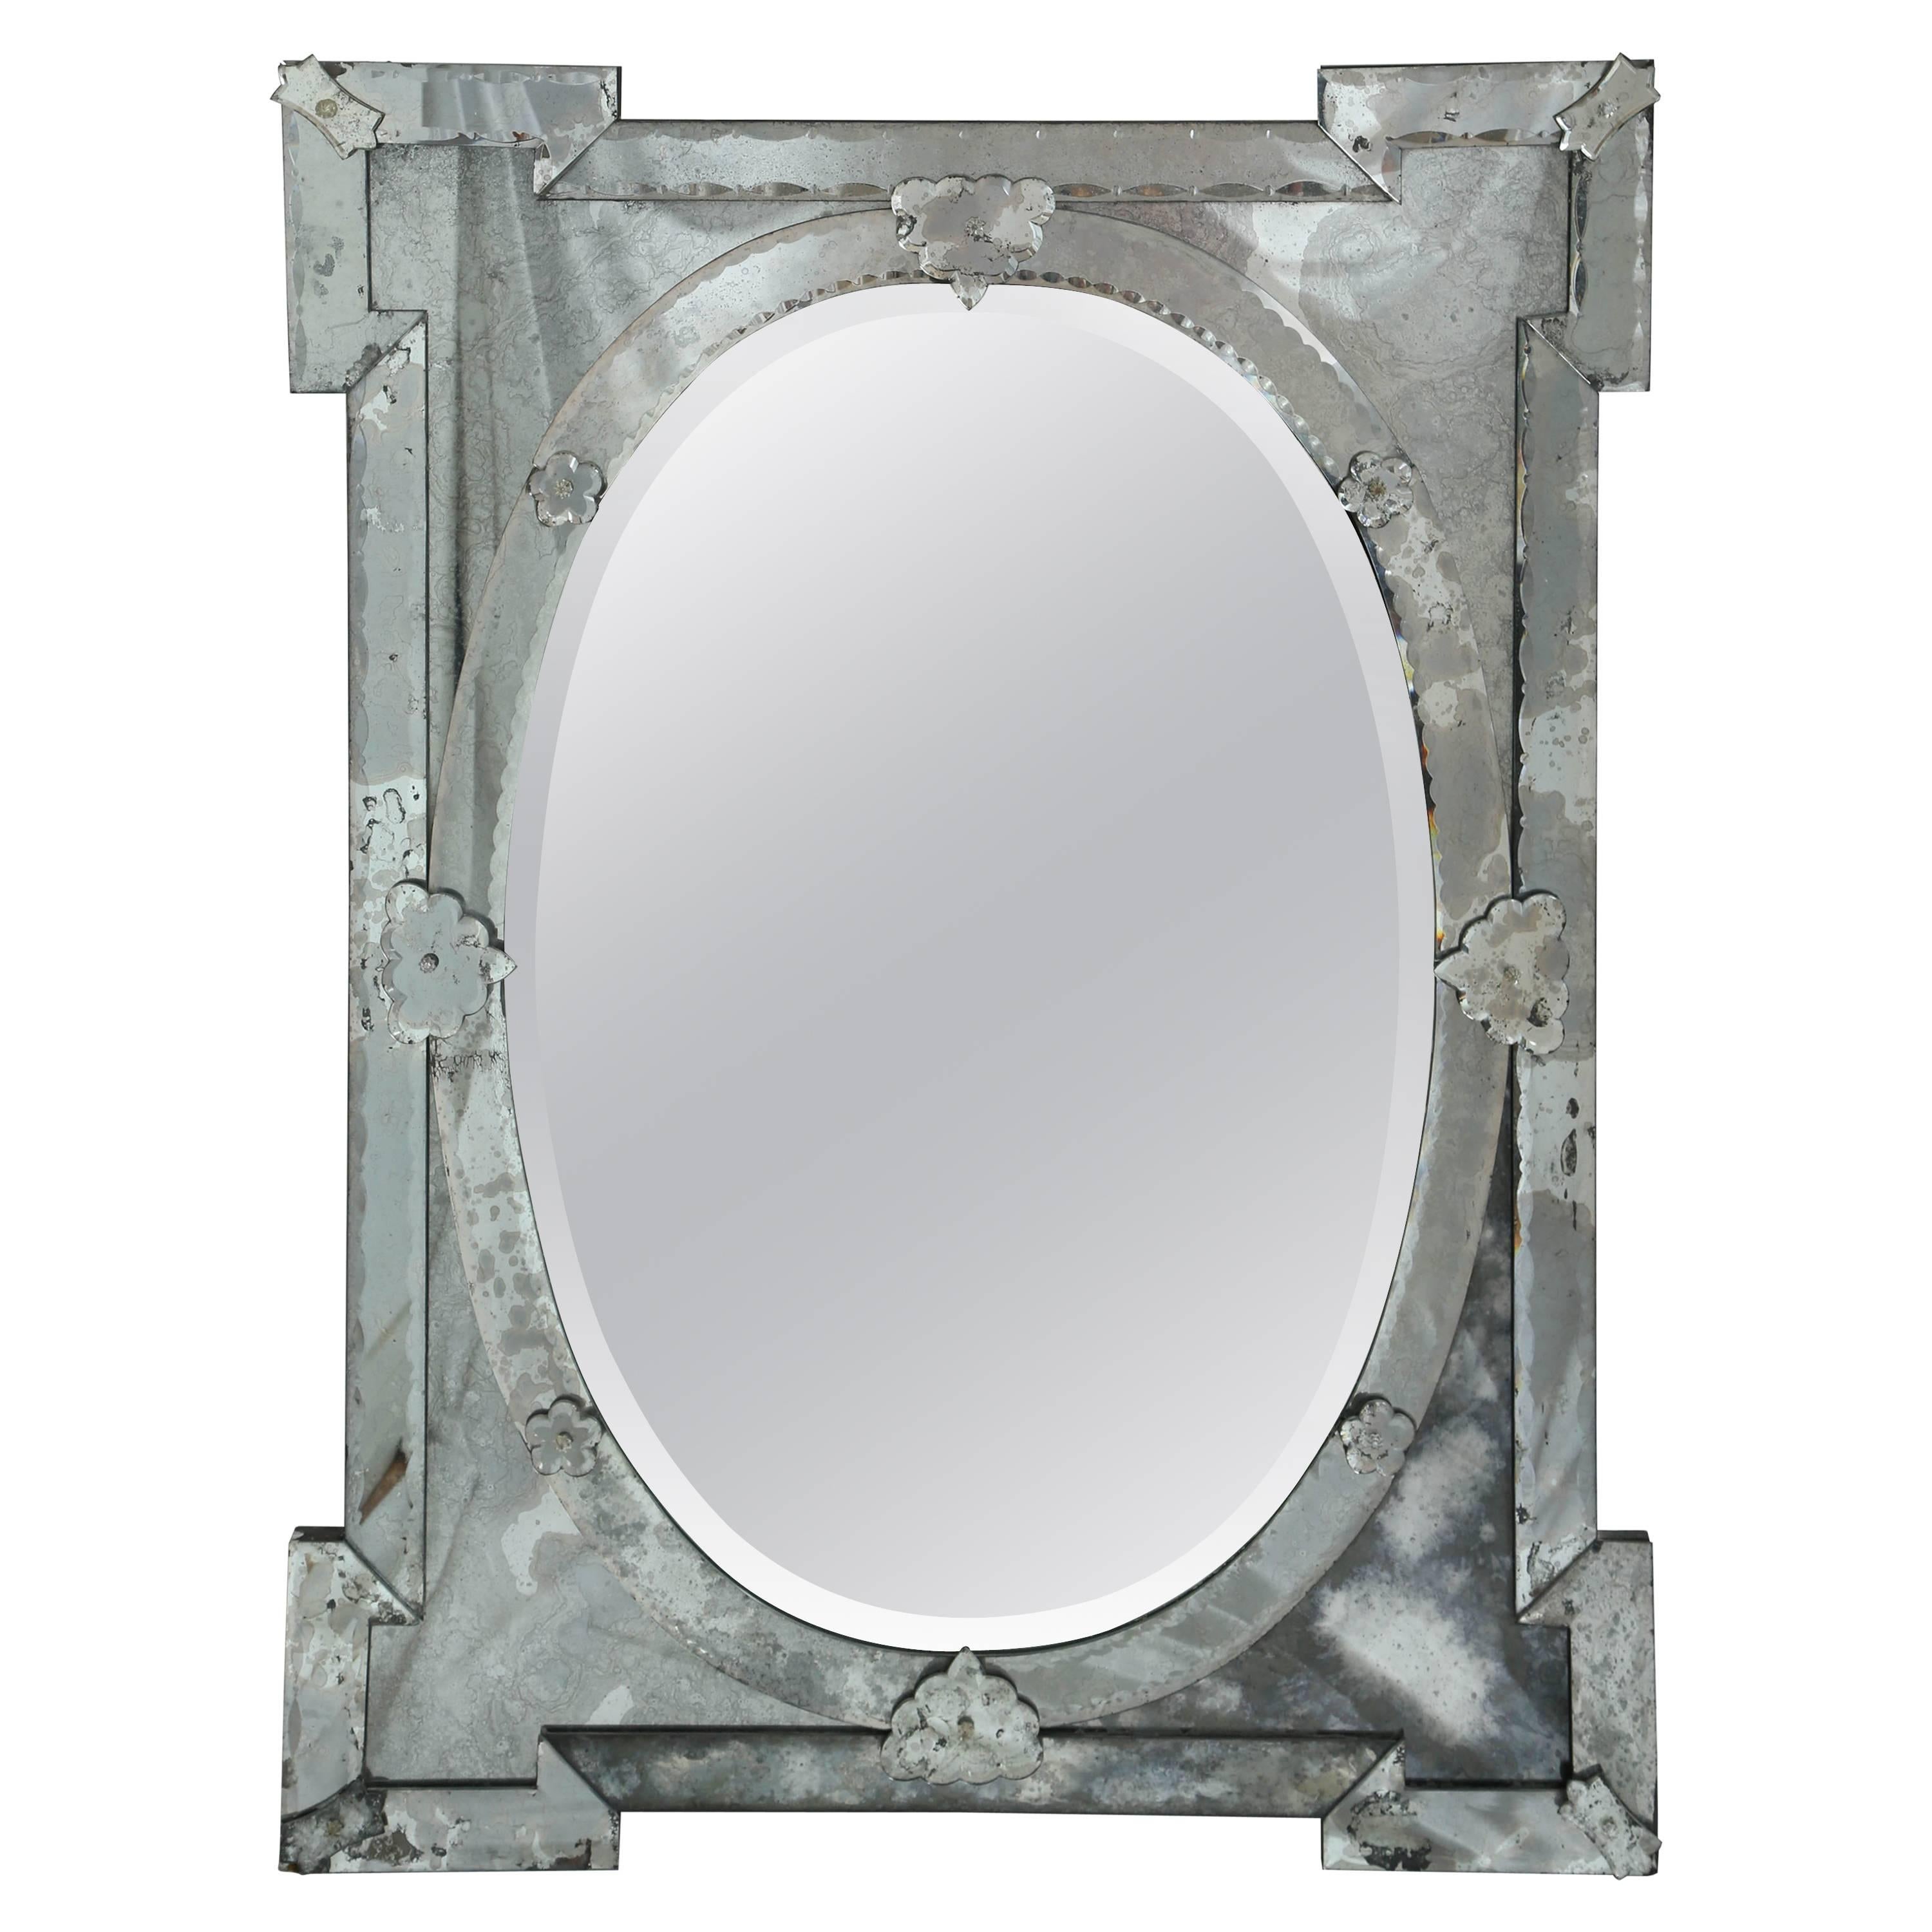 1940's Hollywood Regency Venetian Mirror with Exquisite Shield Design